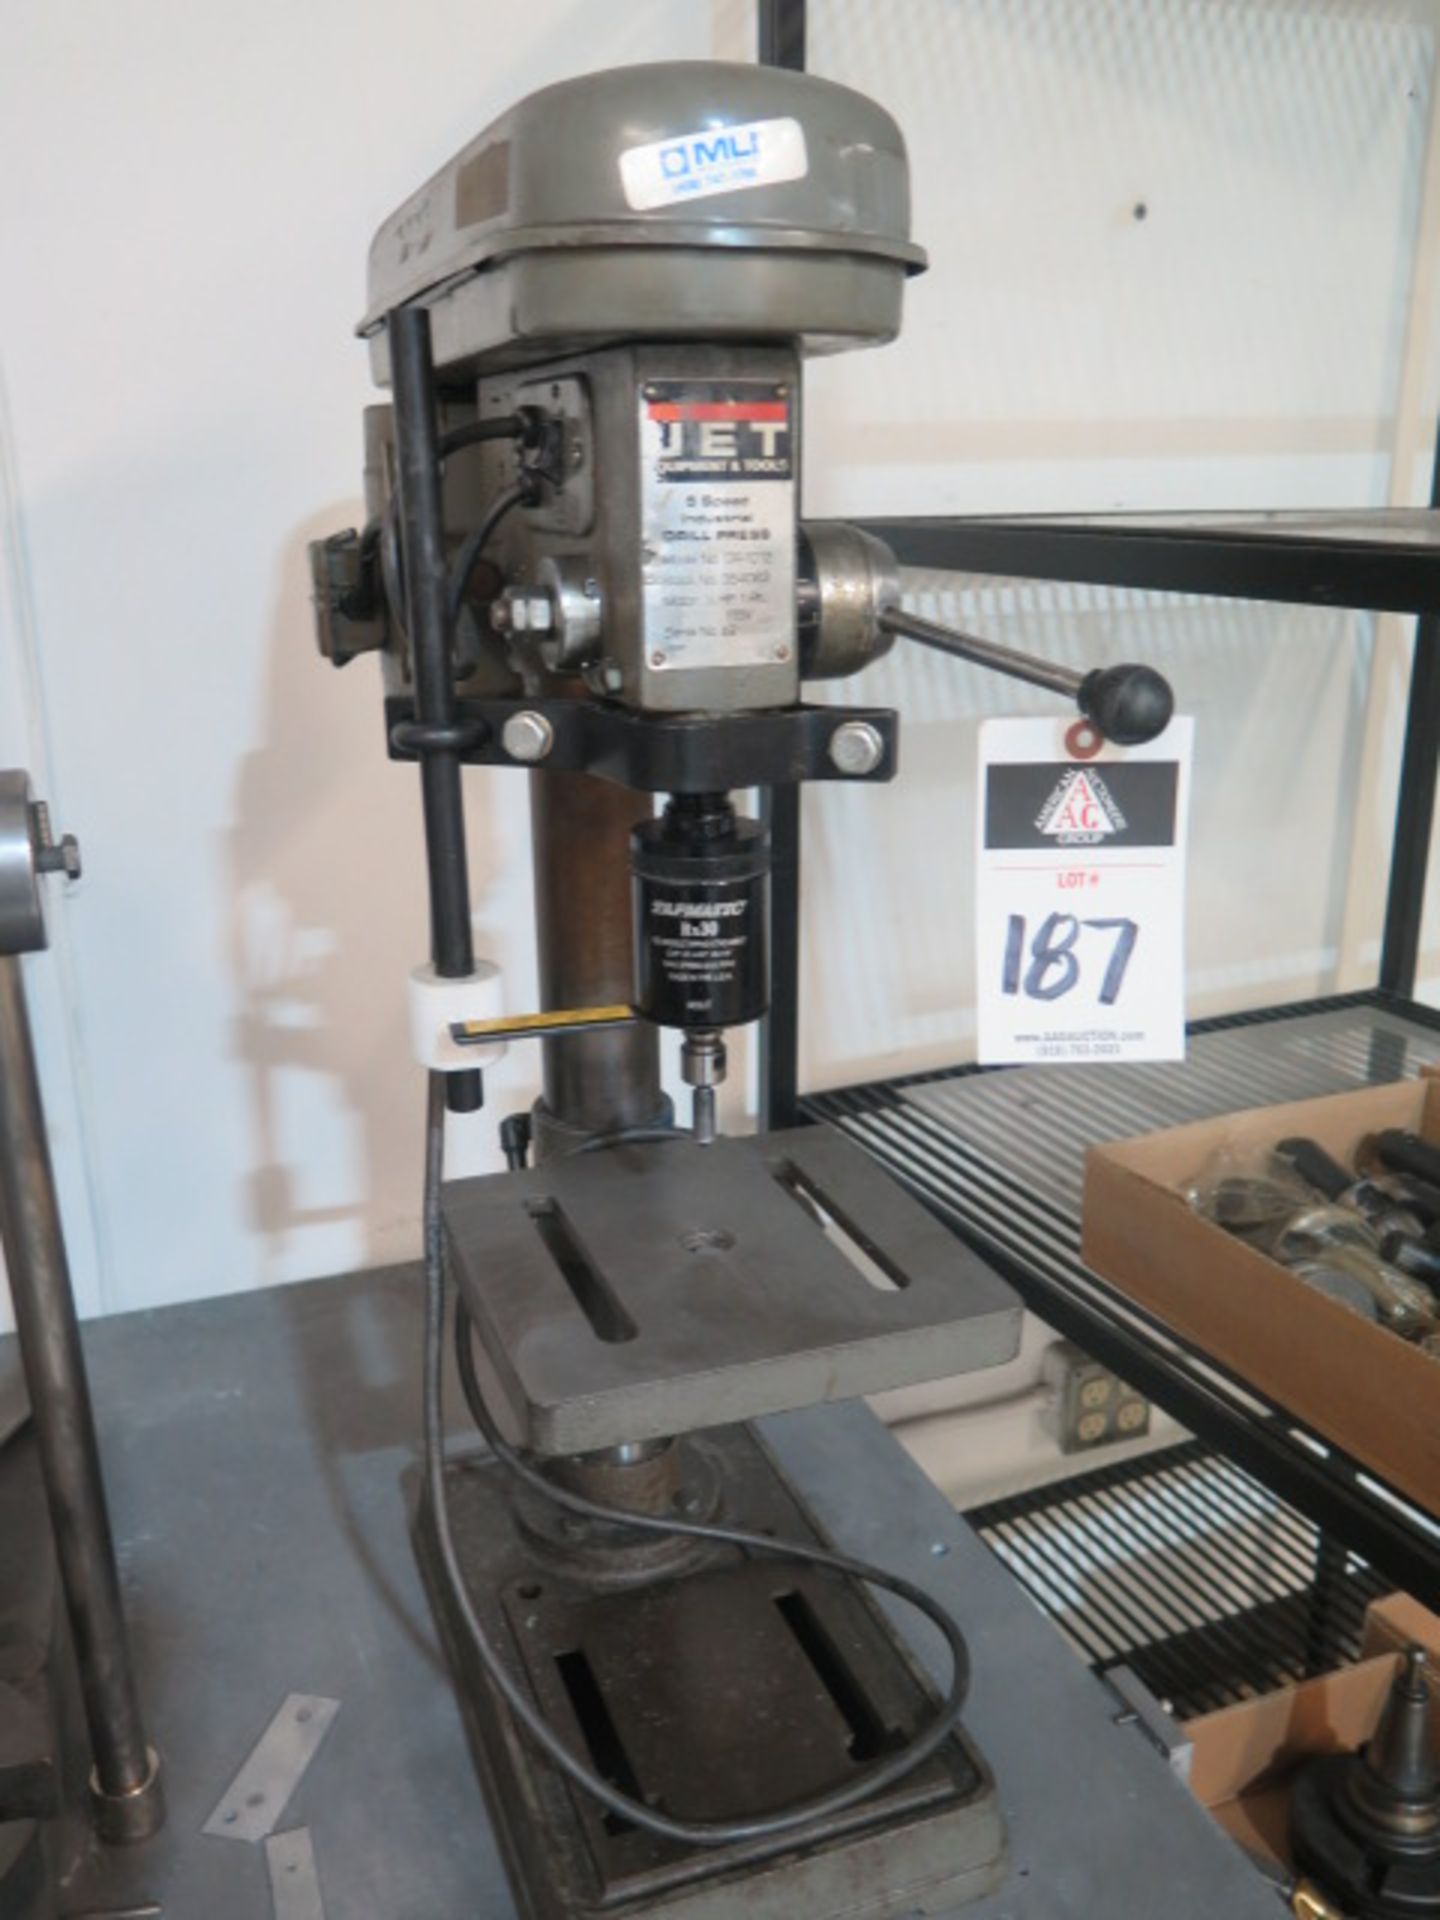 Jet Table Model 5-Speed Drill Press w/ Tapmatic Rx30 Tapping Head